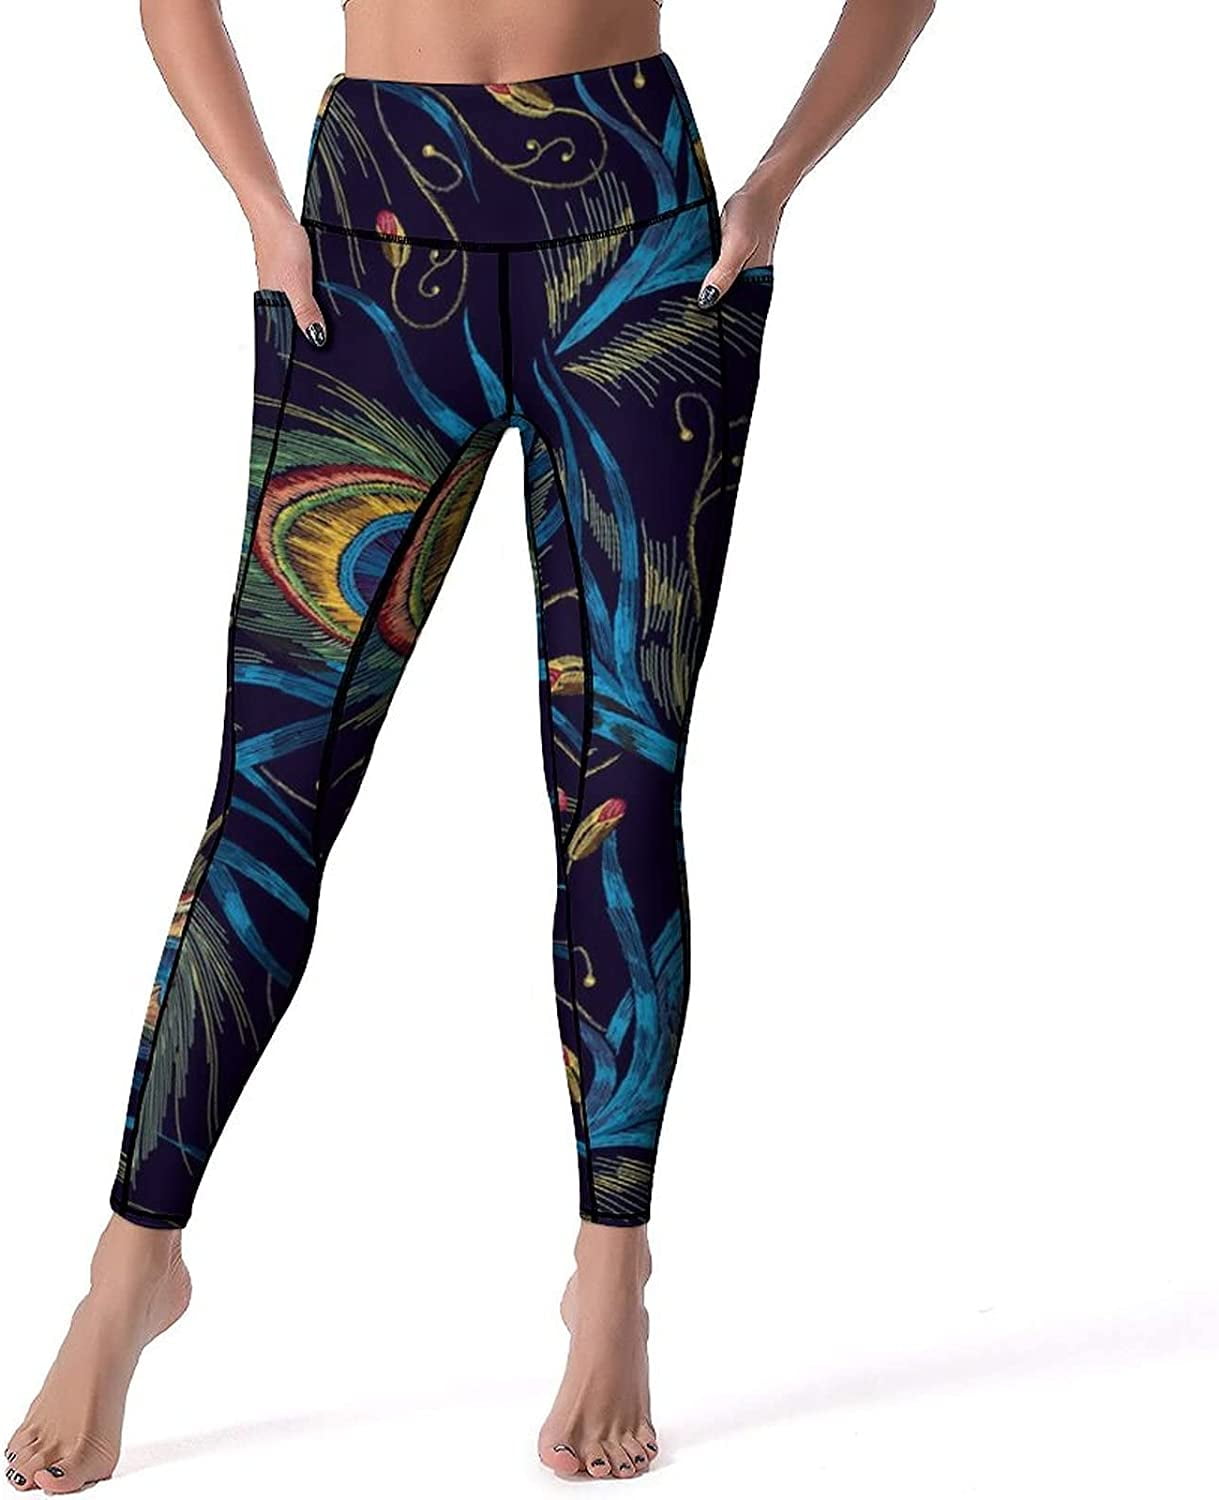 Indian Ethnic Peacock Feather Women's High Waist Yoga Pants with